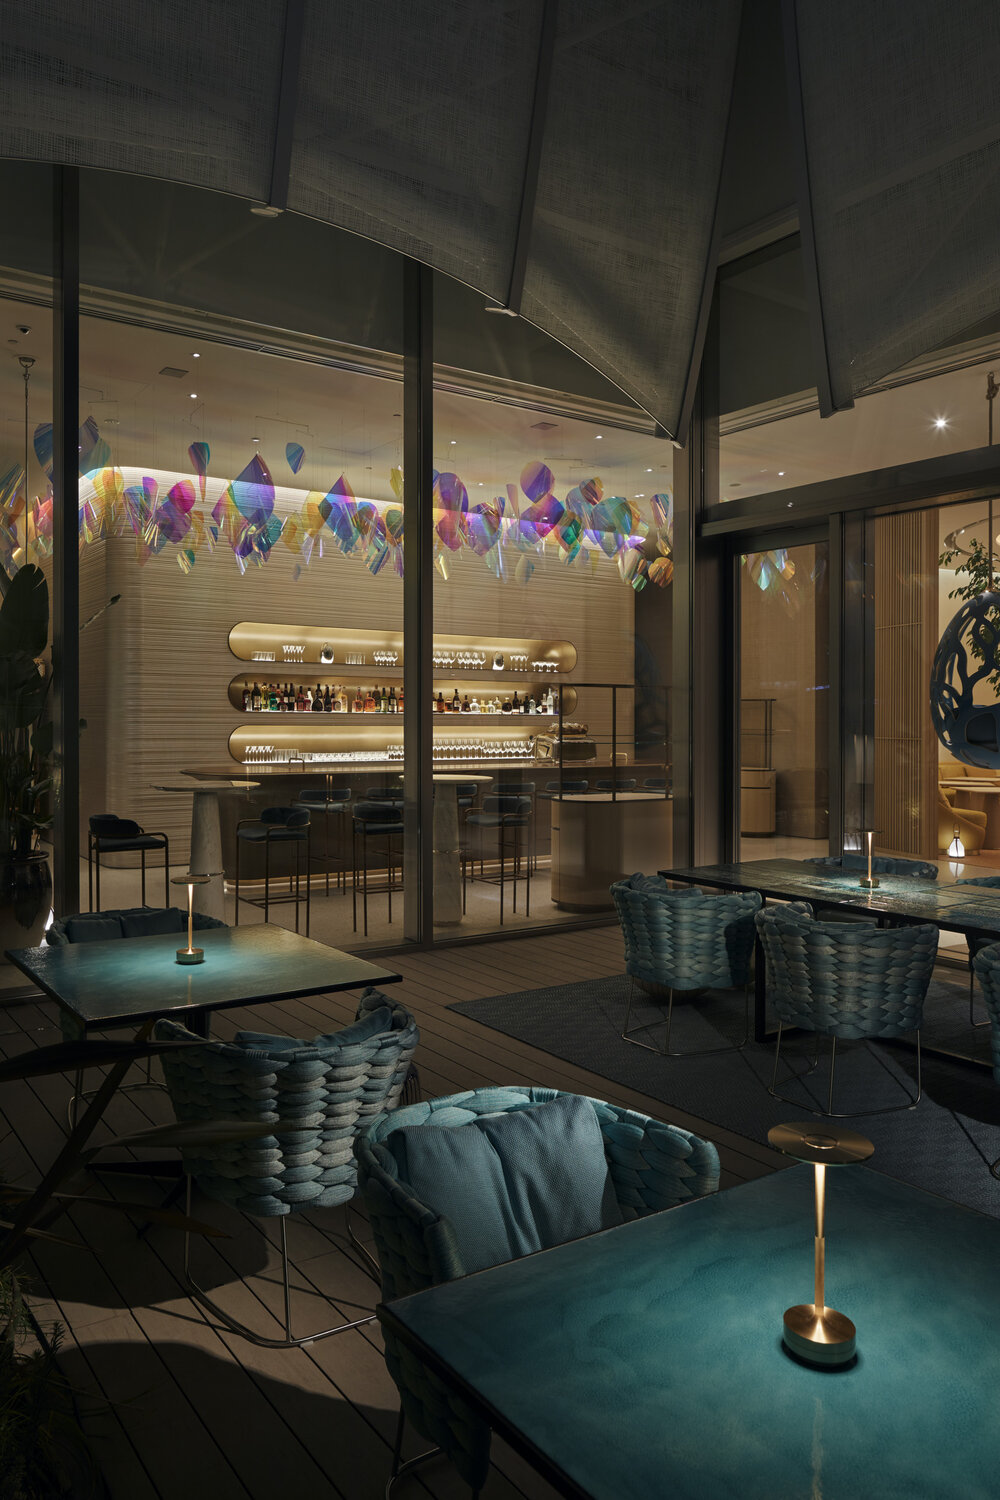 LE CAFE V, Osaka: The first Louis Vuitton cafe in the world